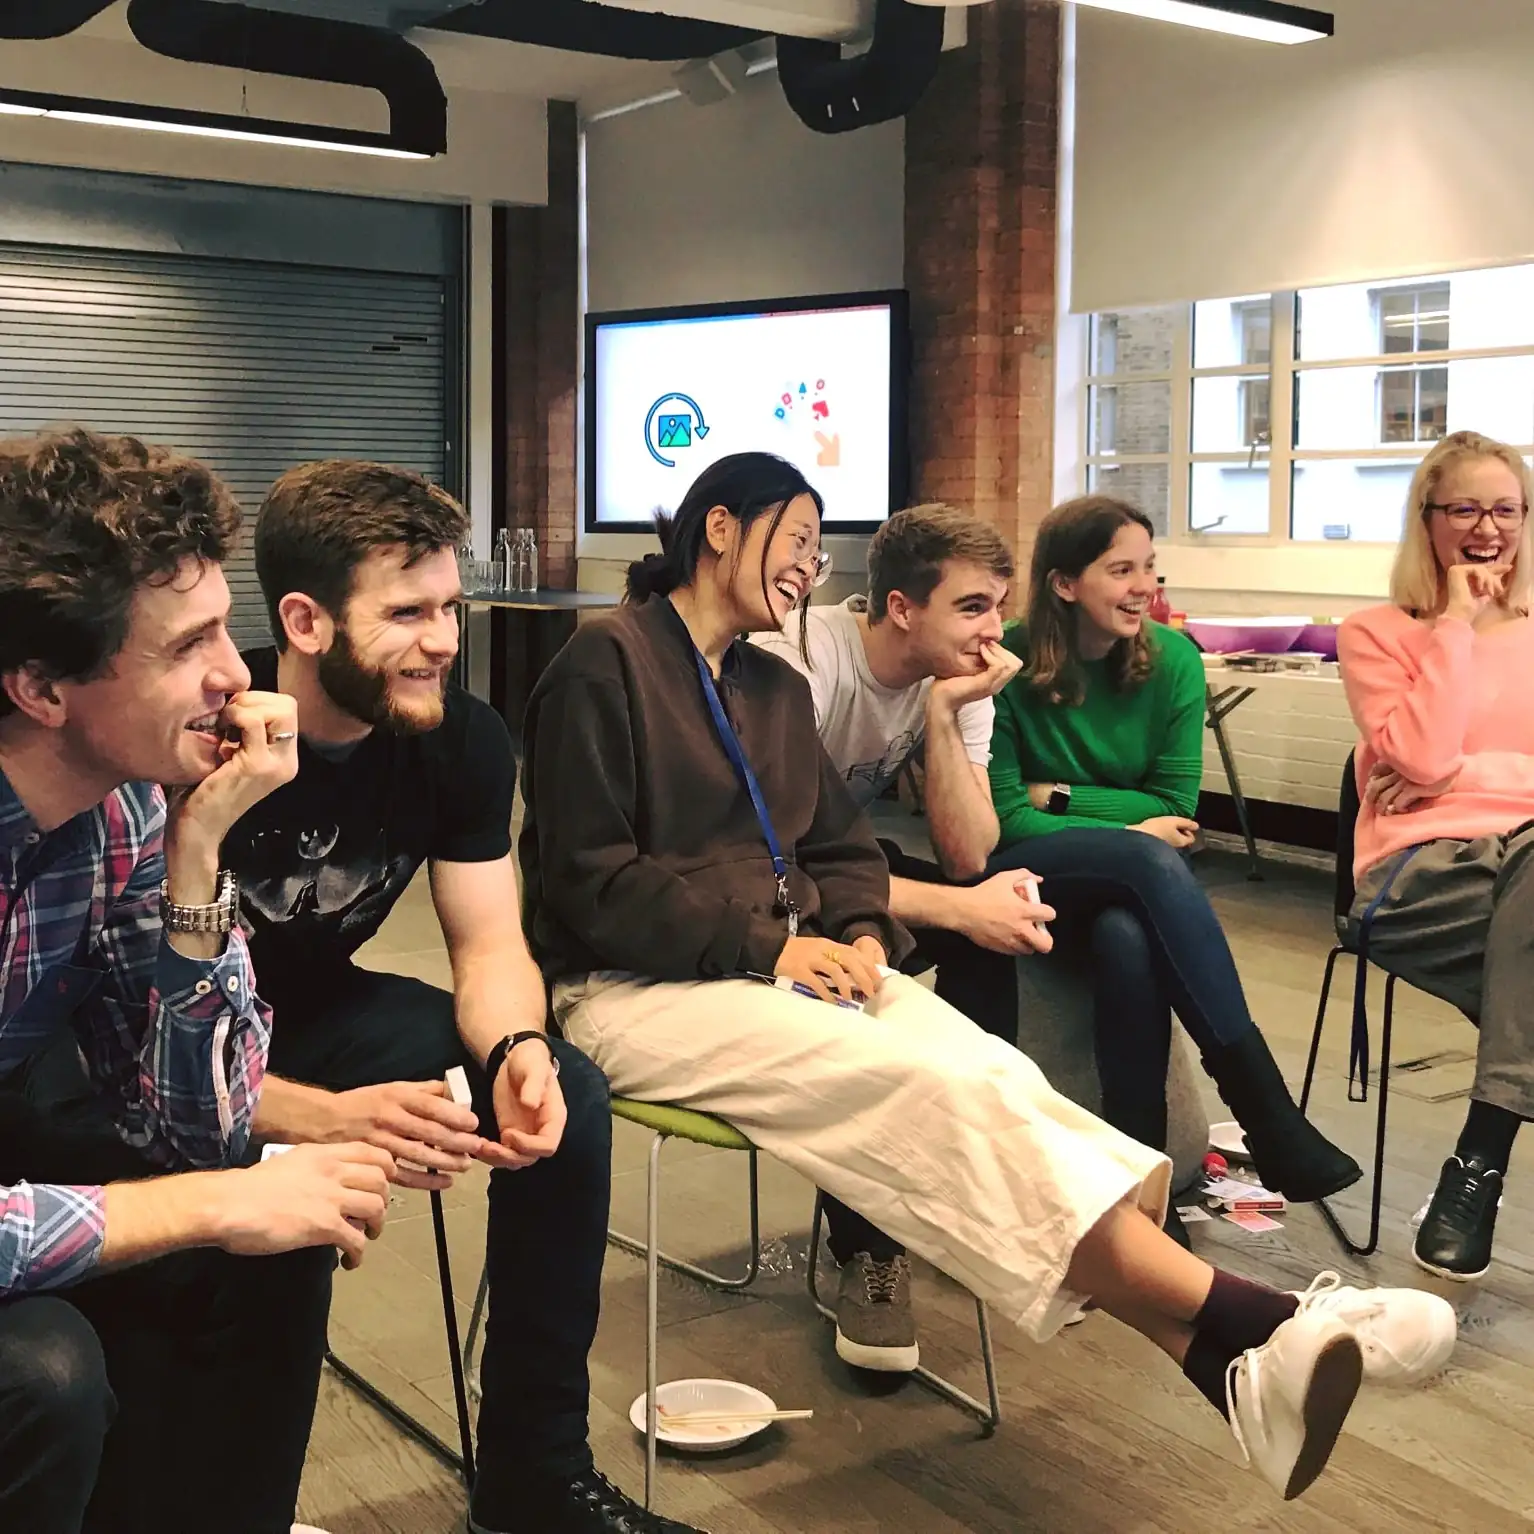 Photo of colleagues laughing and smiling while listening to a presentation.